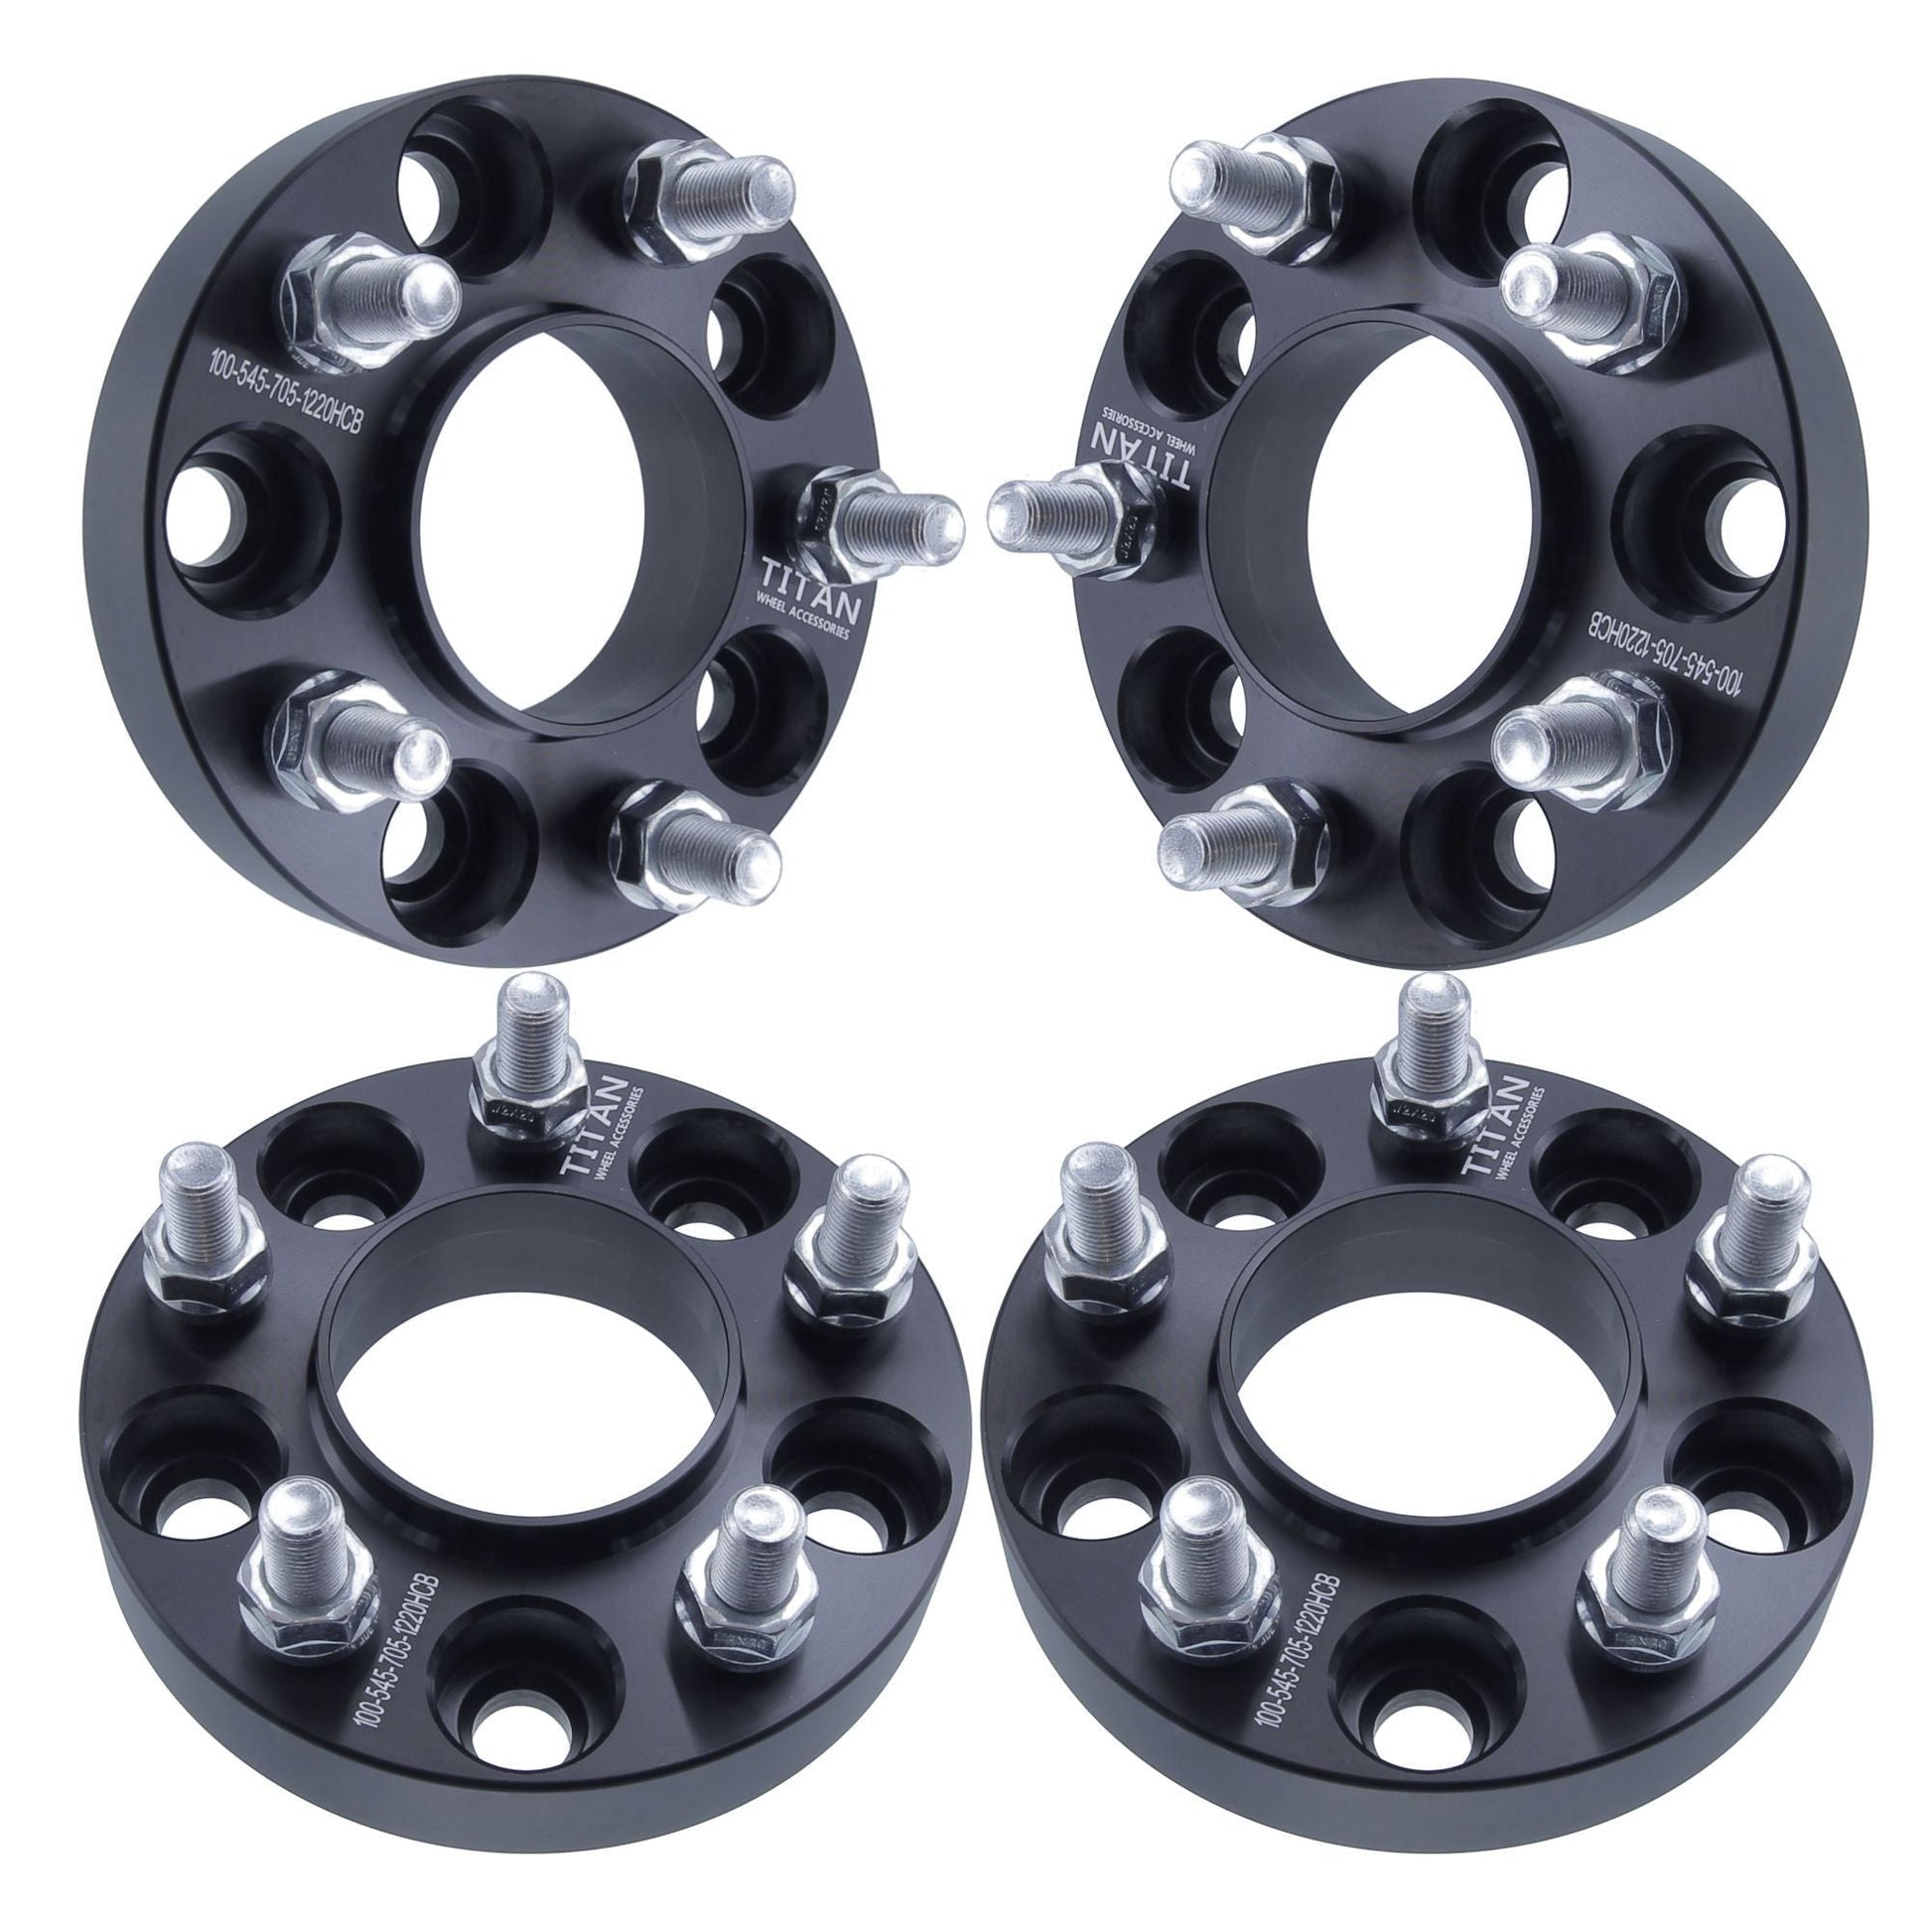 1.5 inch Hubcentric 5x4.5 Wheel Spacers (70.5mm Bore, 1/2x20 Studs)  Compatible with Ford Mustang Edge Crown Victoria Ranger Explorer, Lincoln  Town Car